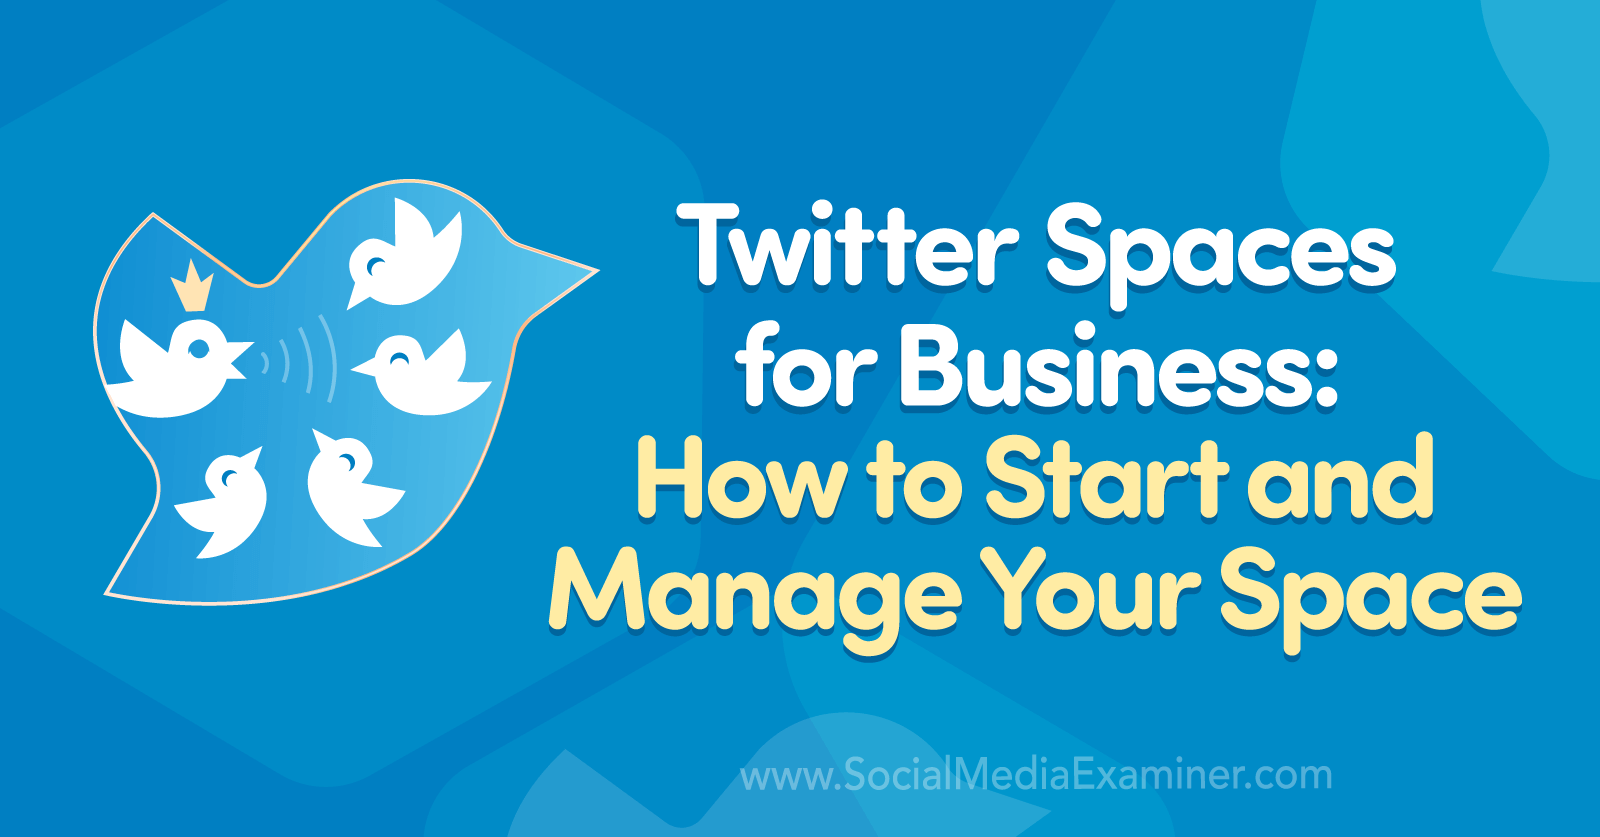 Twitter Spaces for Business: How to Start and Manage Your Space by Madalyn Sklar on Social Media Examiner.